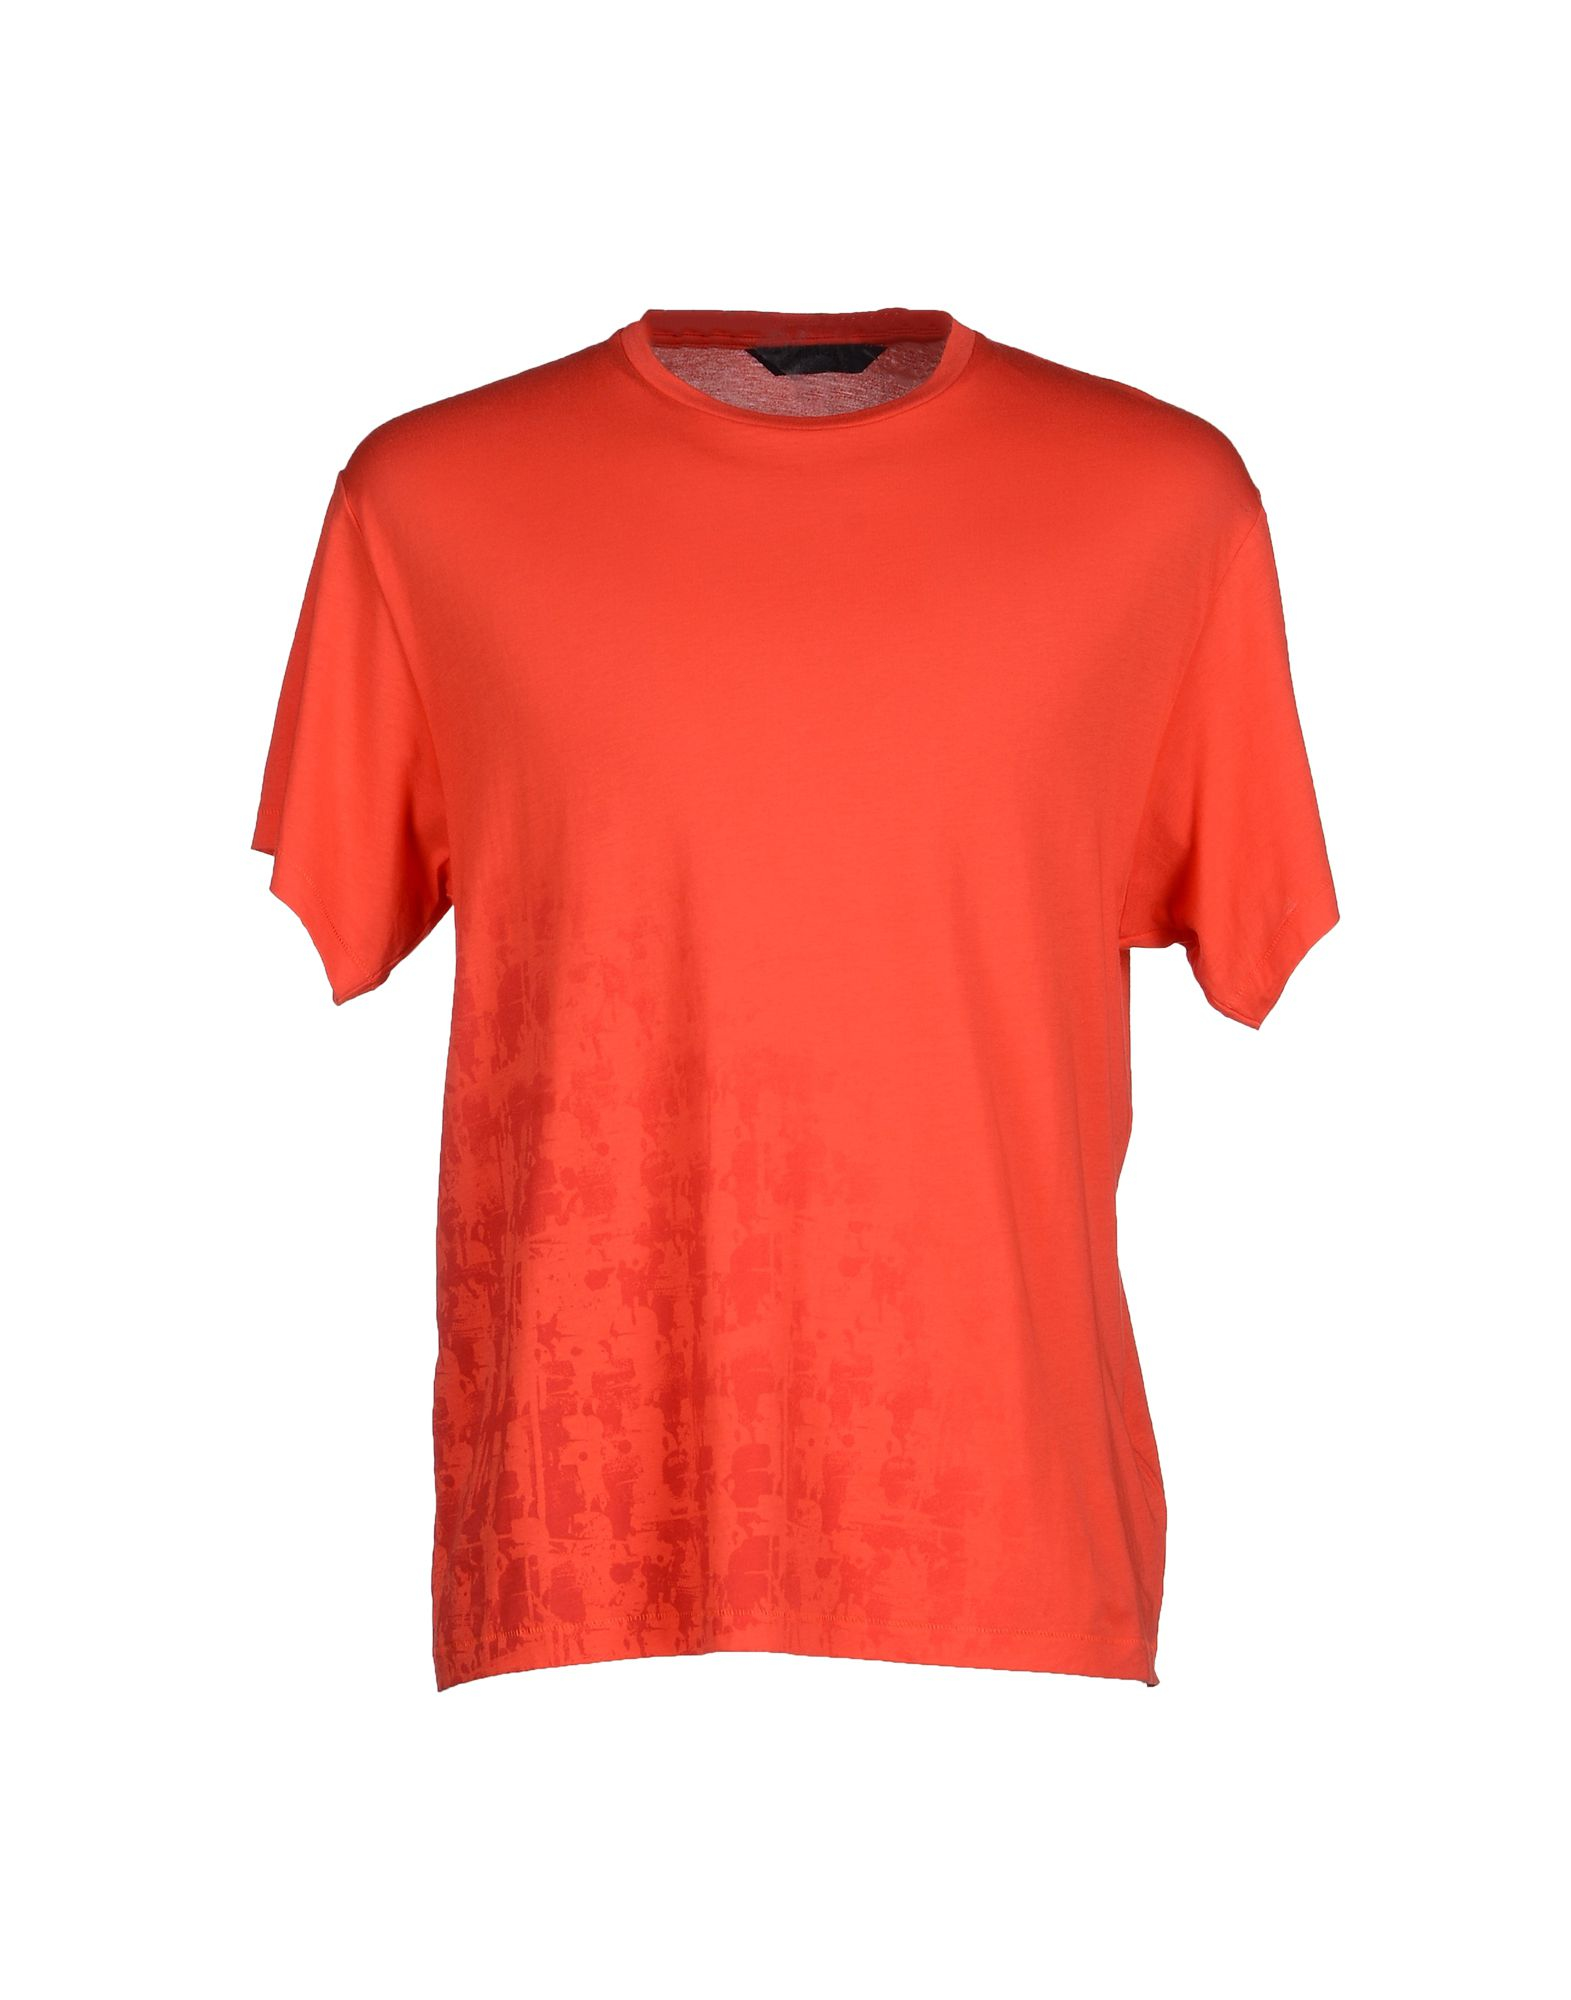 Lyst - Karl By Karl Lagerfeld T-shirt in Red for Men